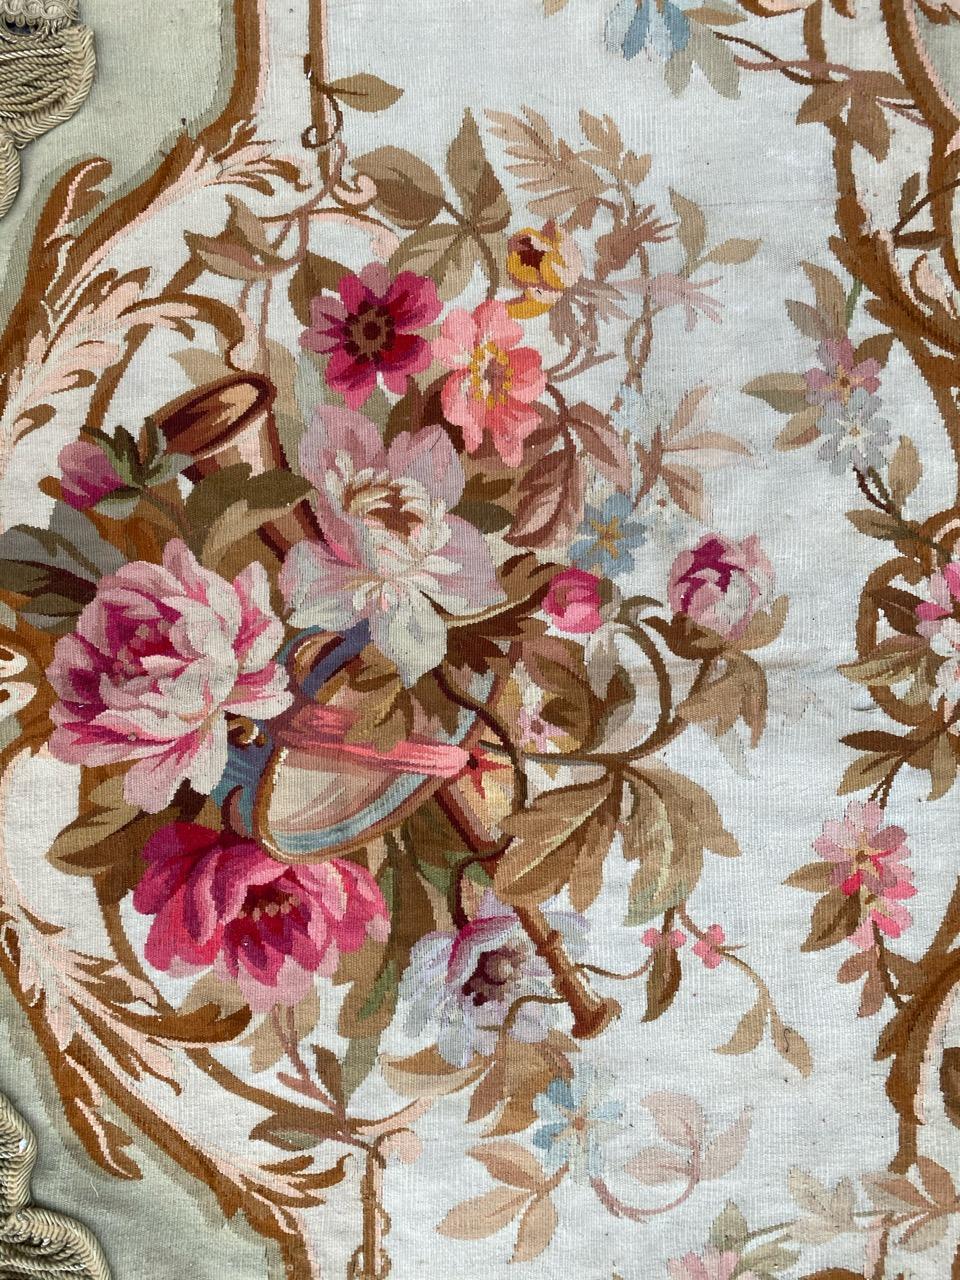 Very beautiful late 19th century Aubusson Valence tapestry from Napoleon the third period, with nice floral design and beautiful colors, entirely and finely handwoven with wool and silk.